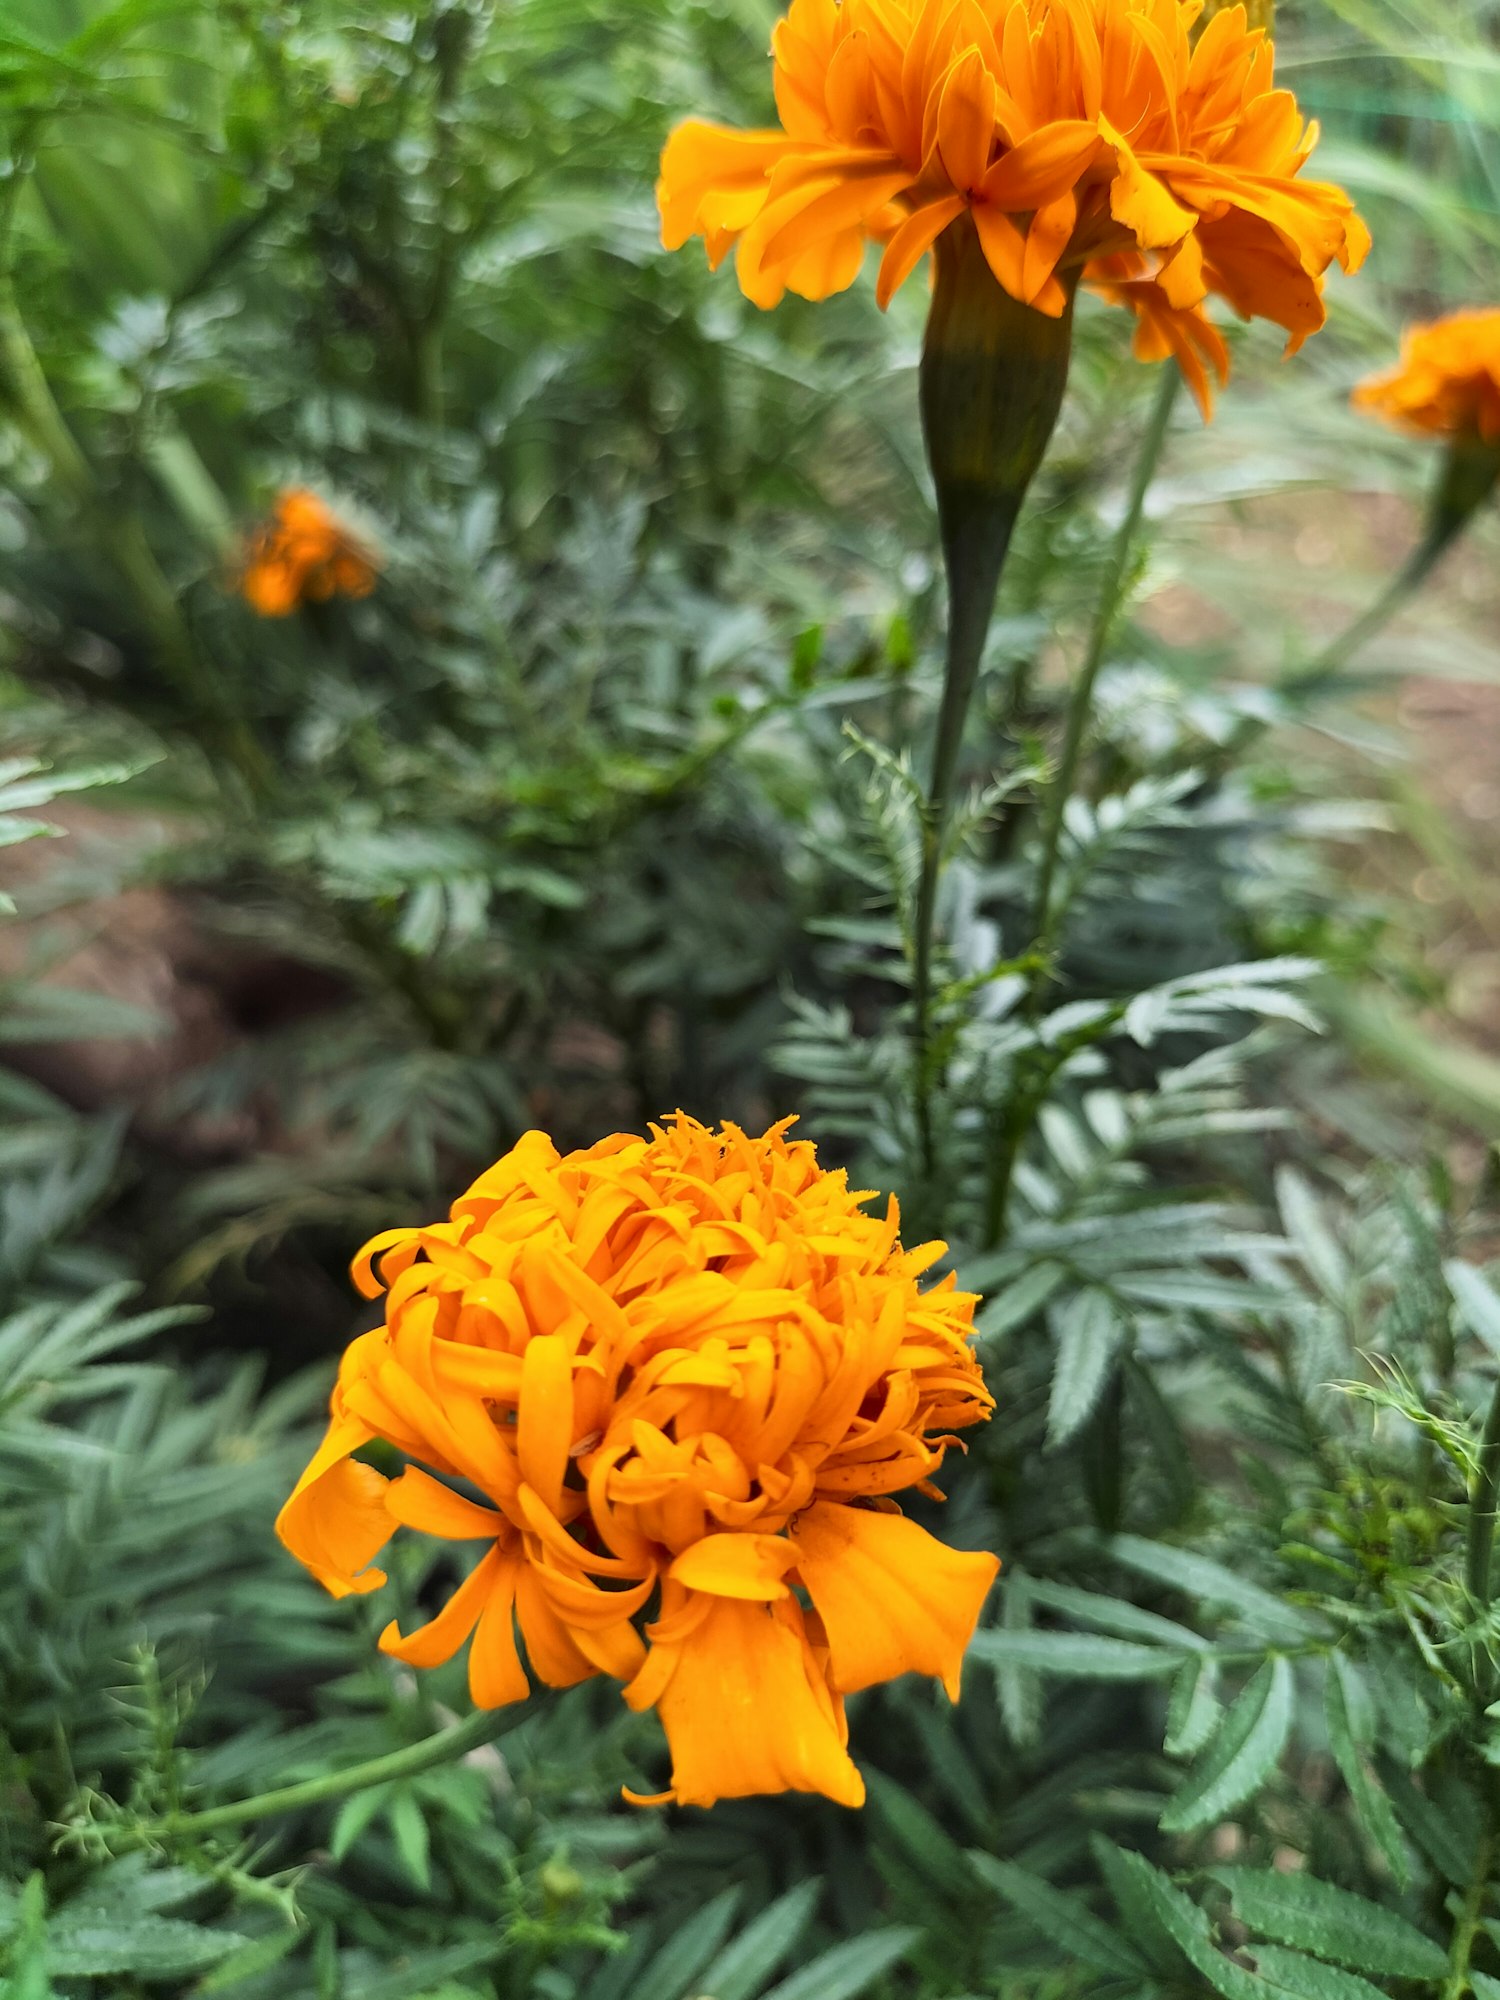 Marigolds with green stem